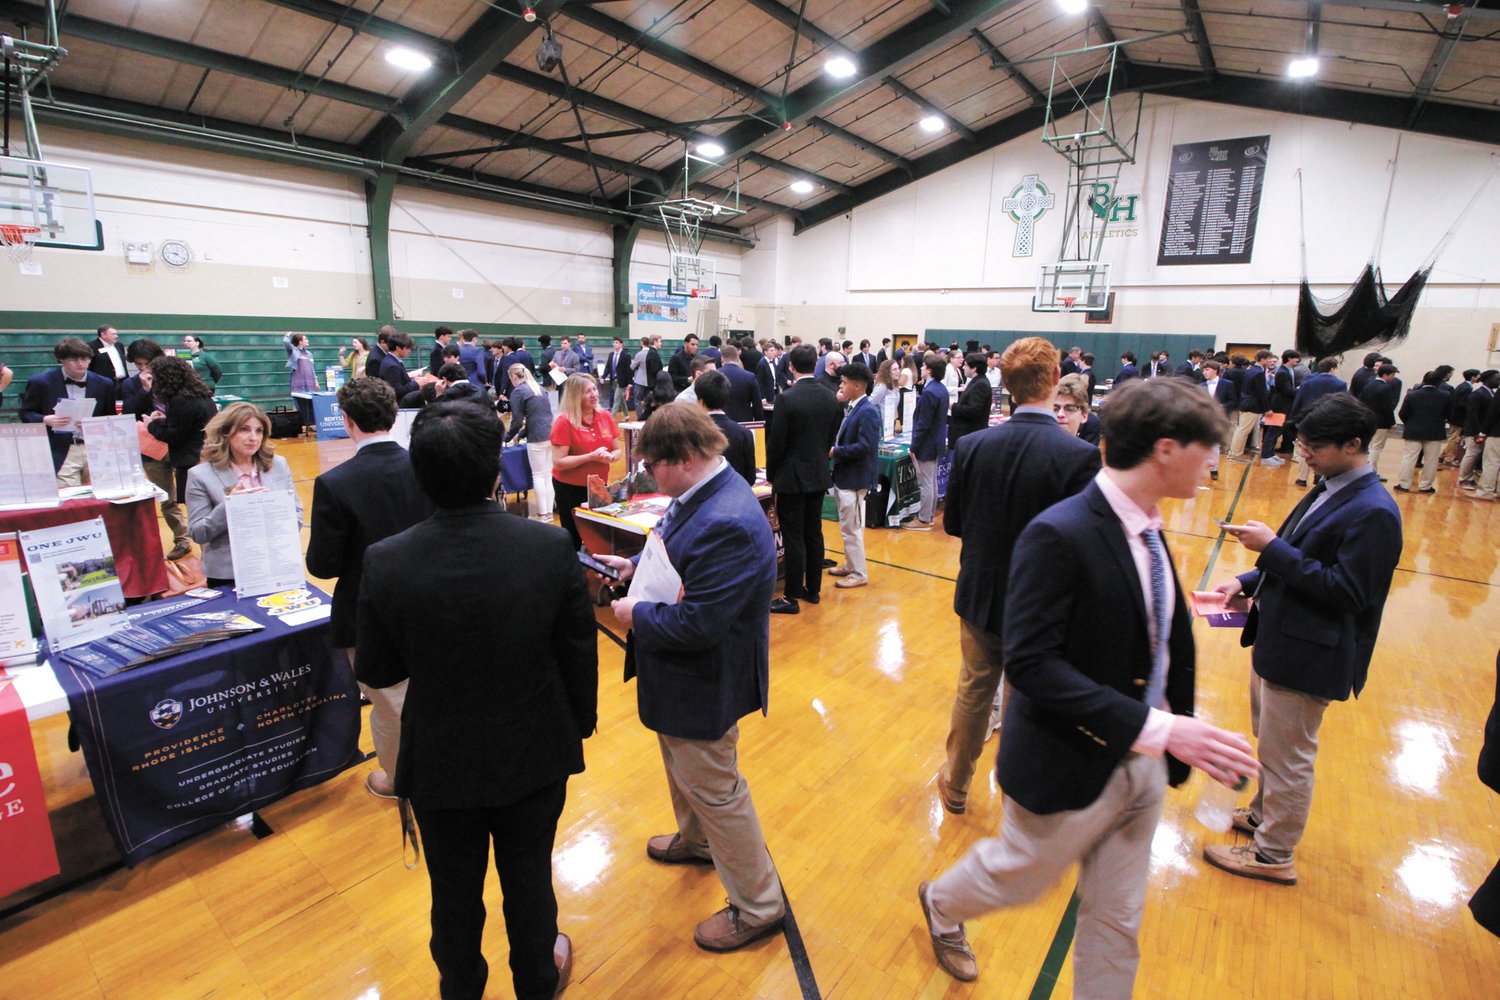 PACKED IN: More than 130 institutions were represented at the Hendricken college fair that was held in the school’s two gymnasiums last Friday.